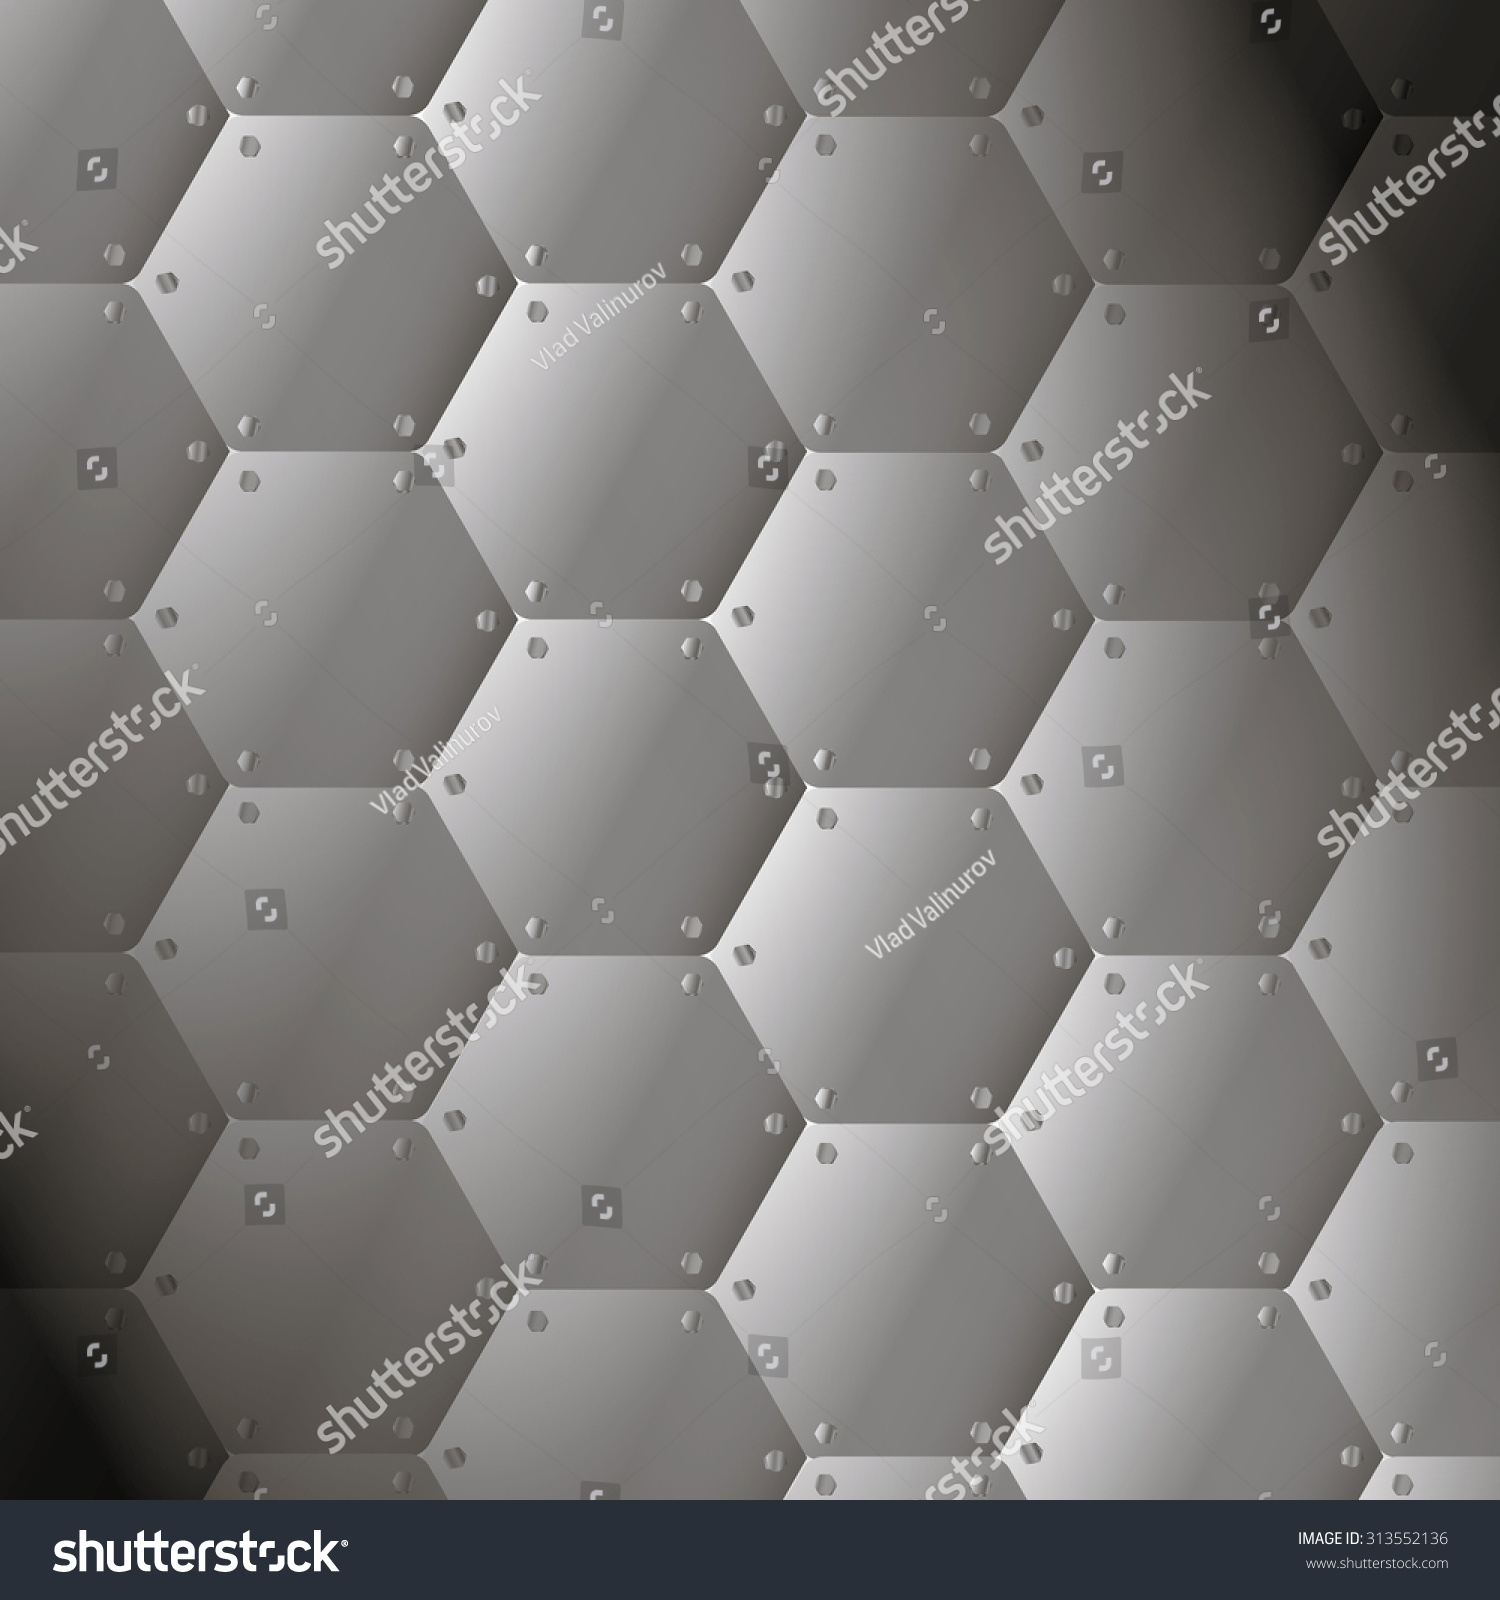 Steel Plates Bolted Gray Stock Vector 313552136 - Shutterstock